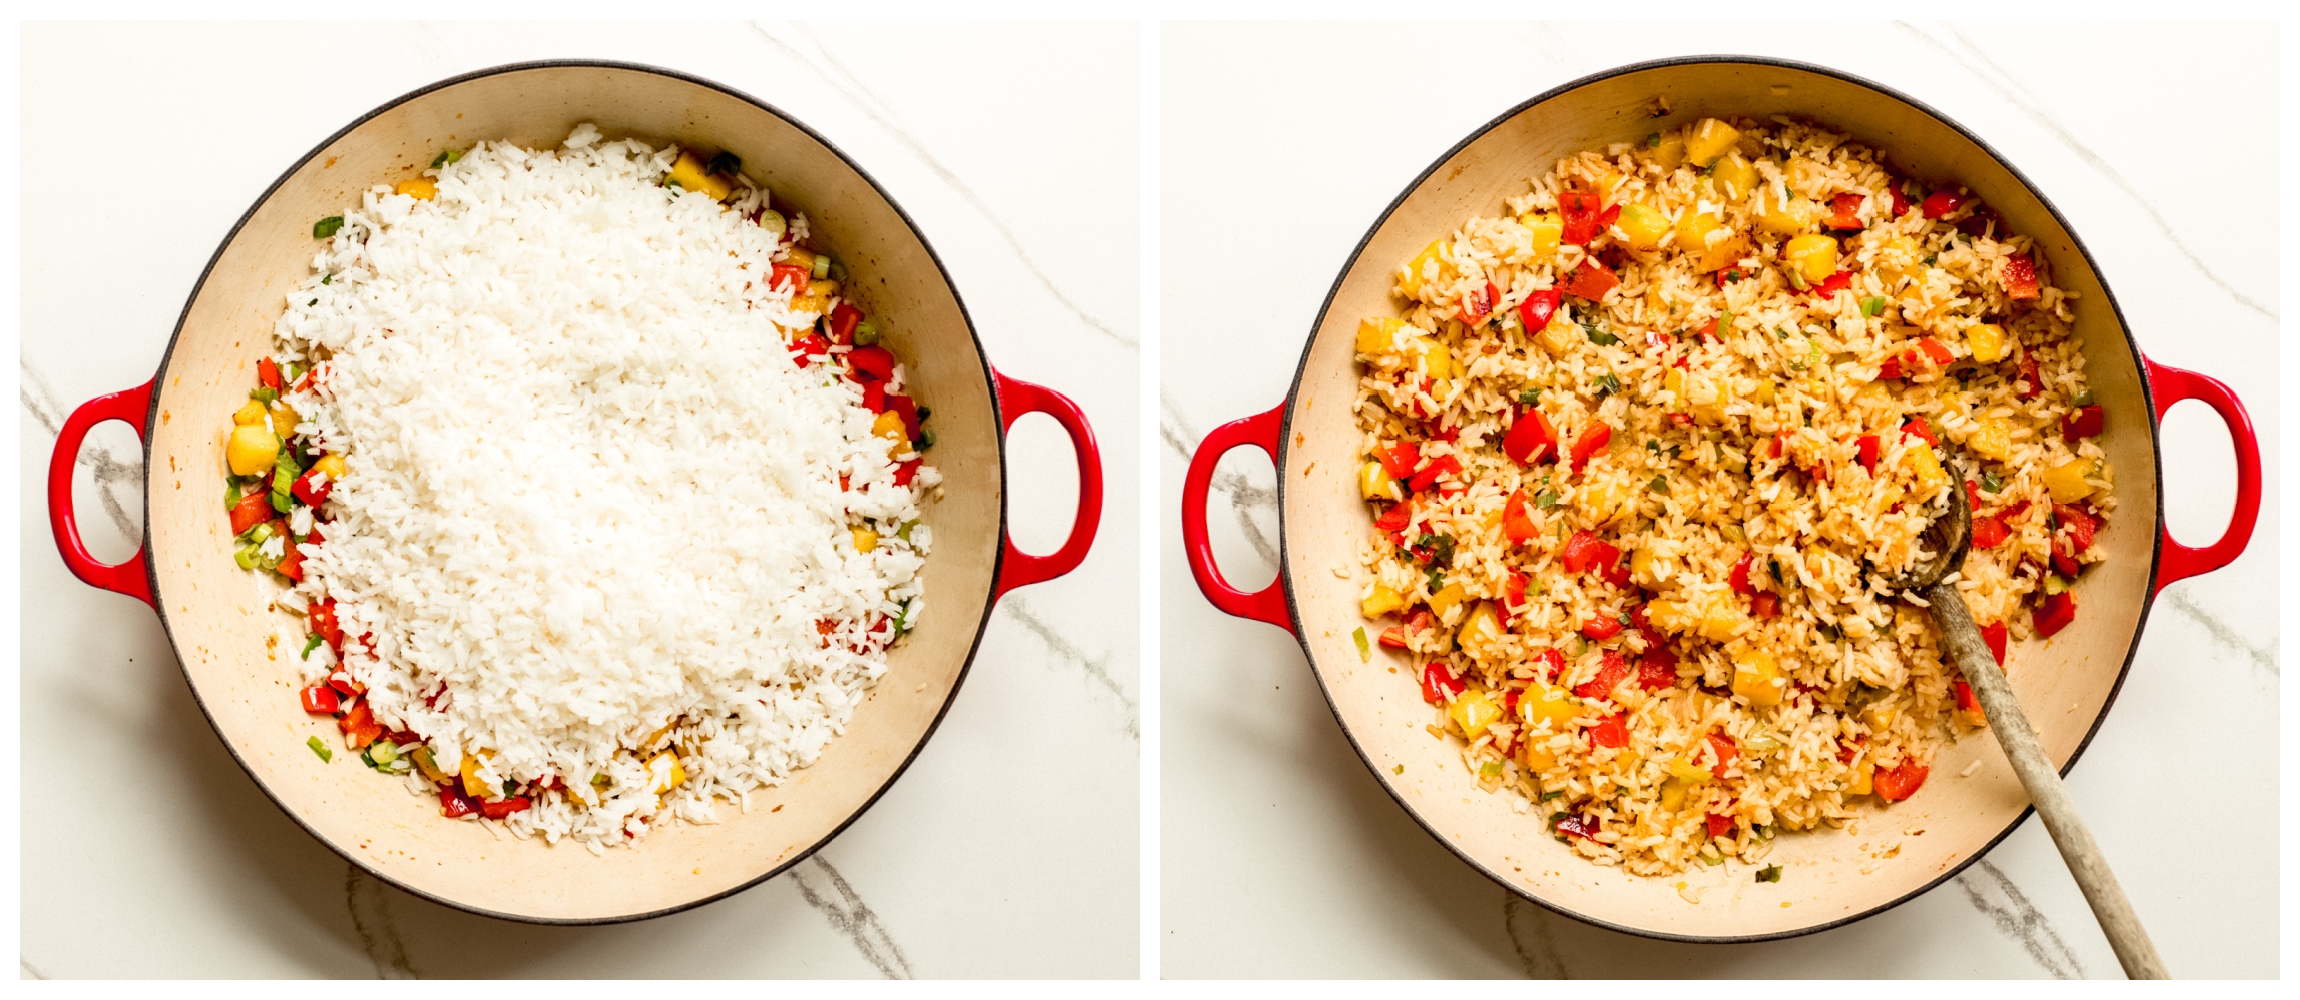 two saucepan photos showing white rice on top of vegetables in one, and rice mixed into vegetables in the second.